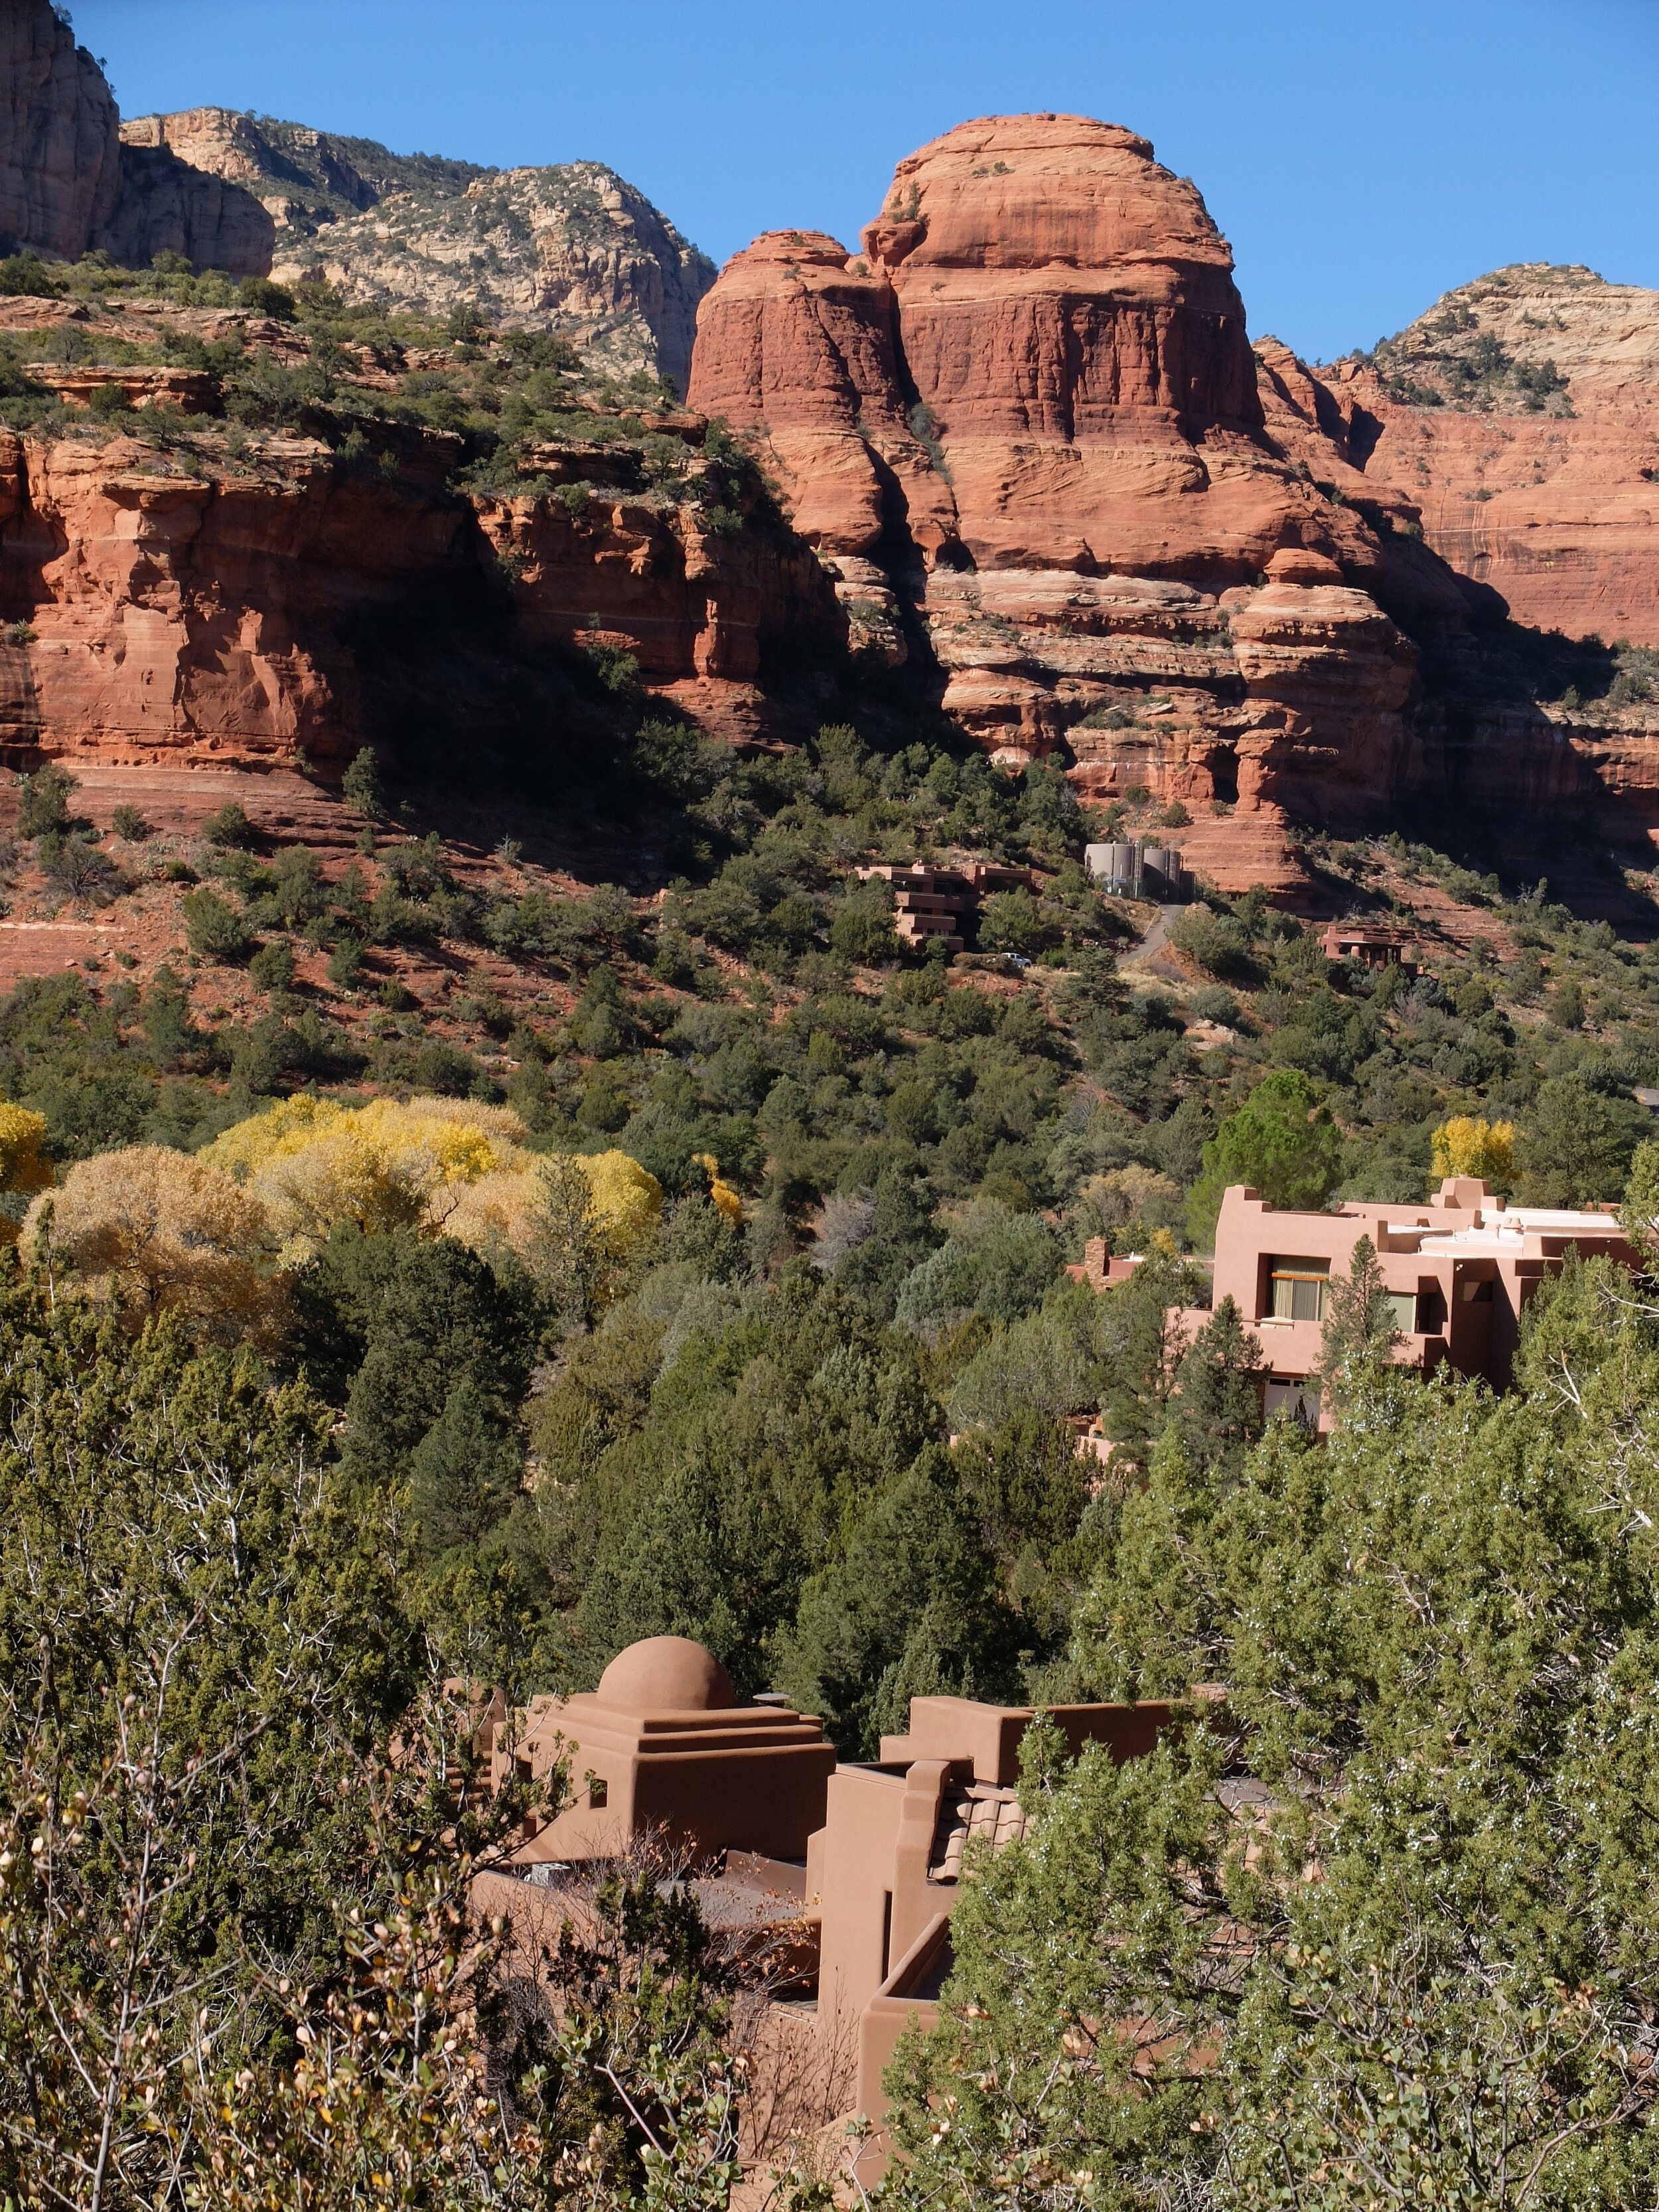 The first third of the Boynton Canyon Trail skirts the Enchantment Resort.